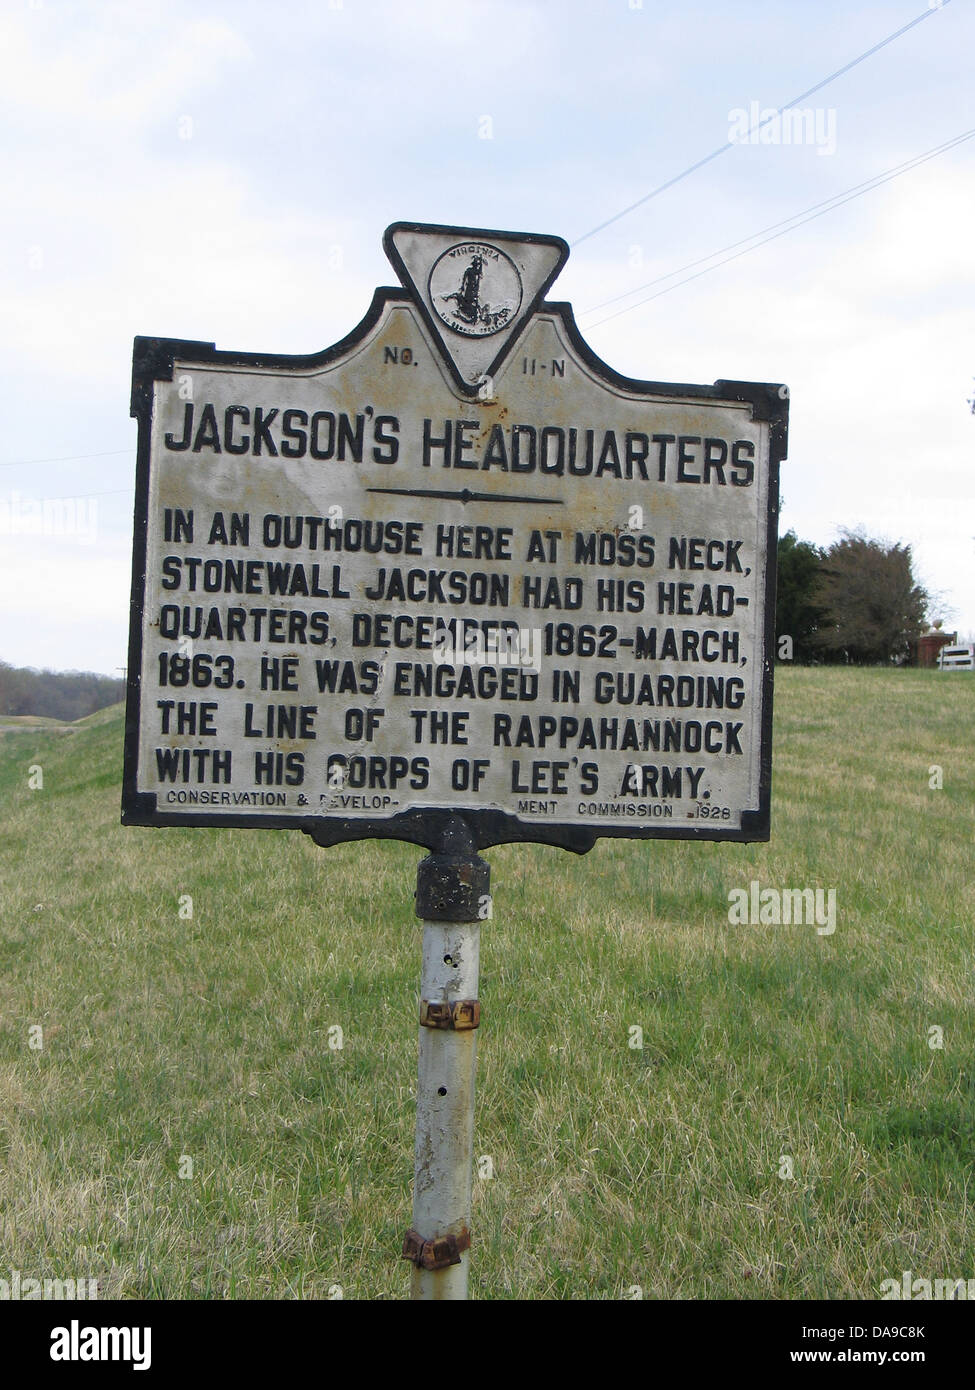 JACKSON'S HEADQUARTERS In an outhouse here at Moss Neck, Stonewall Jackson had his headquarters, December, 1862-March, 1863. He was engaged in guarding the line of the Rappahannock with his corps of Lee's army. Conservation & Development Commission, 1928. Stock Photo